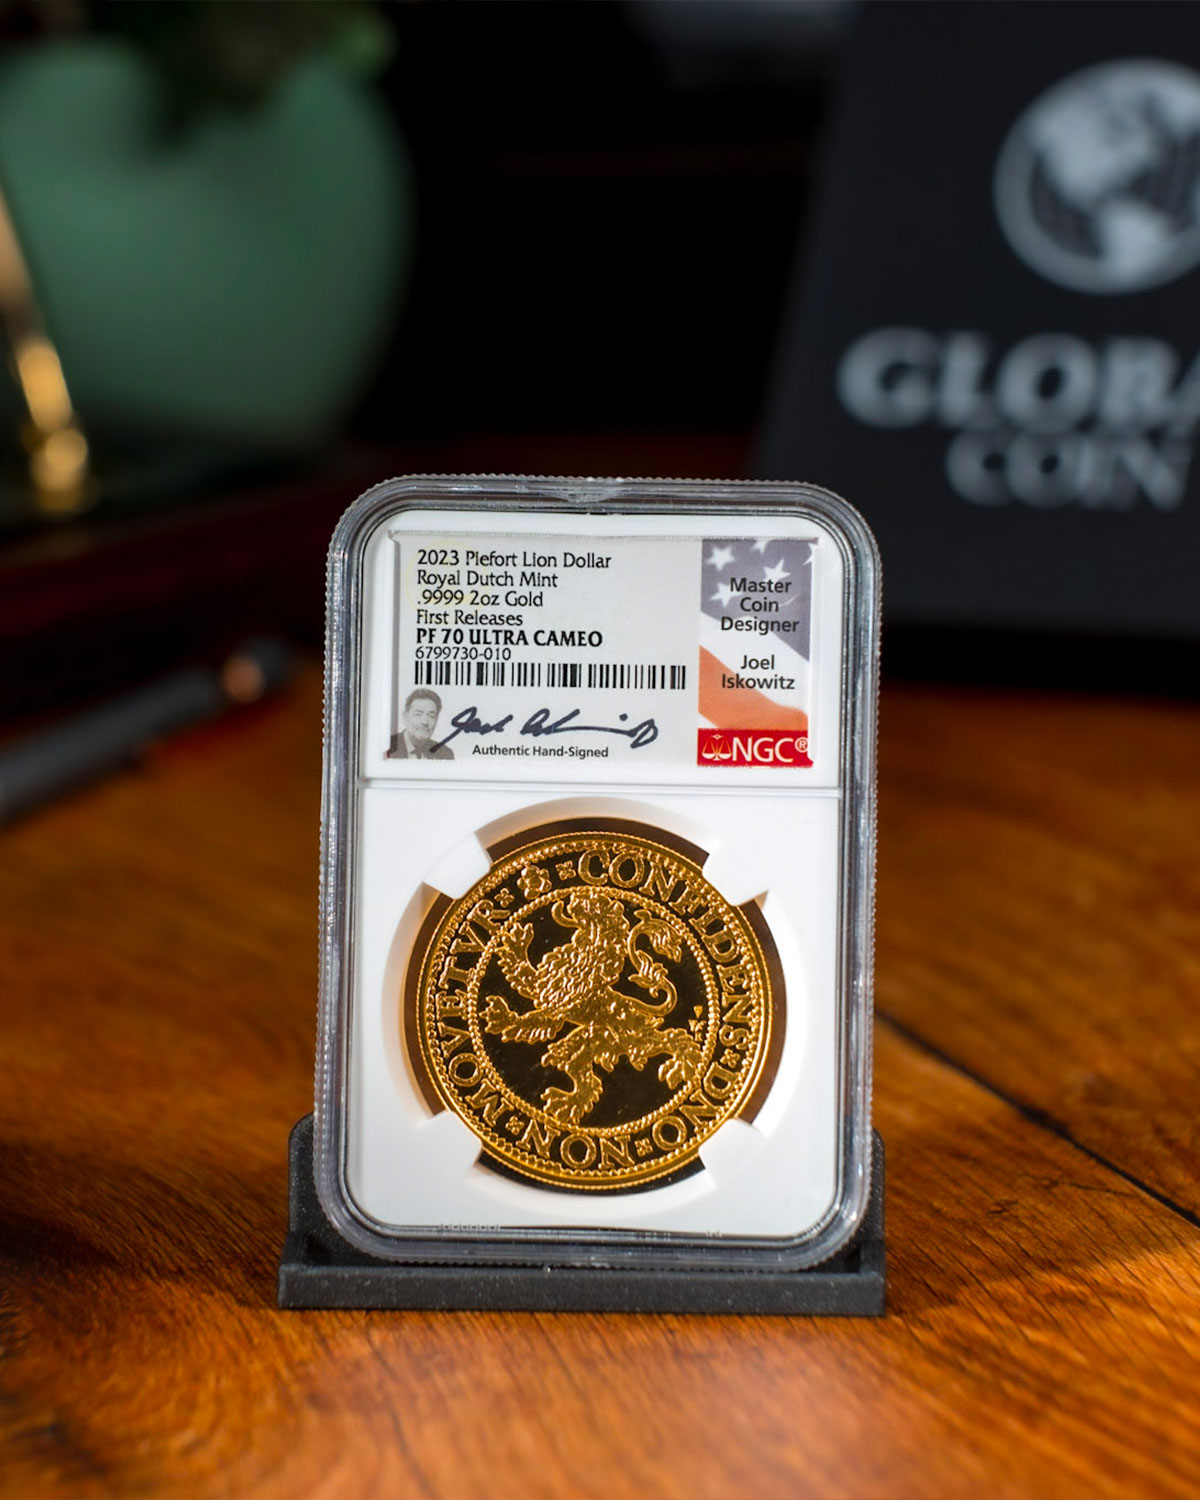 2023 Piefort Lion Dollar Royal Dutch Mint | First Releases PF70 Ultra Cameo | Joel Iskowitz Autographed